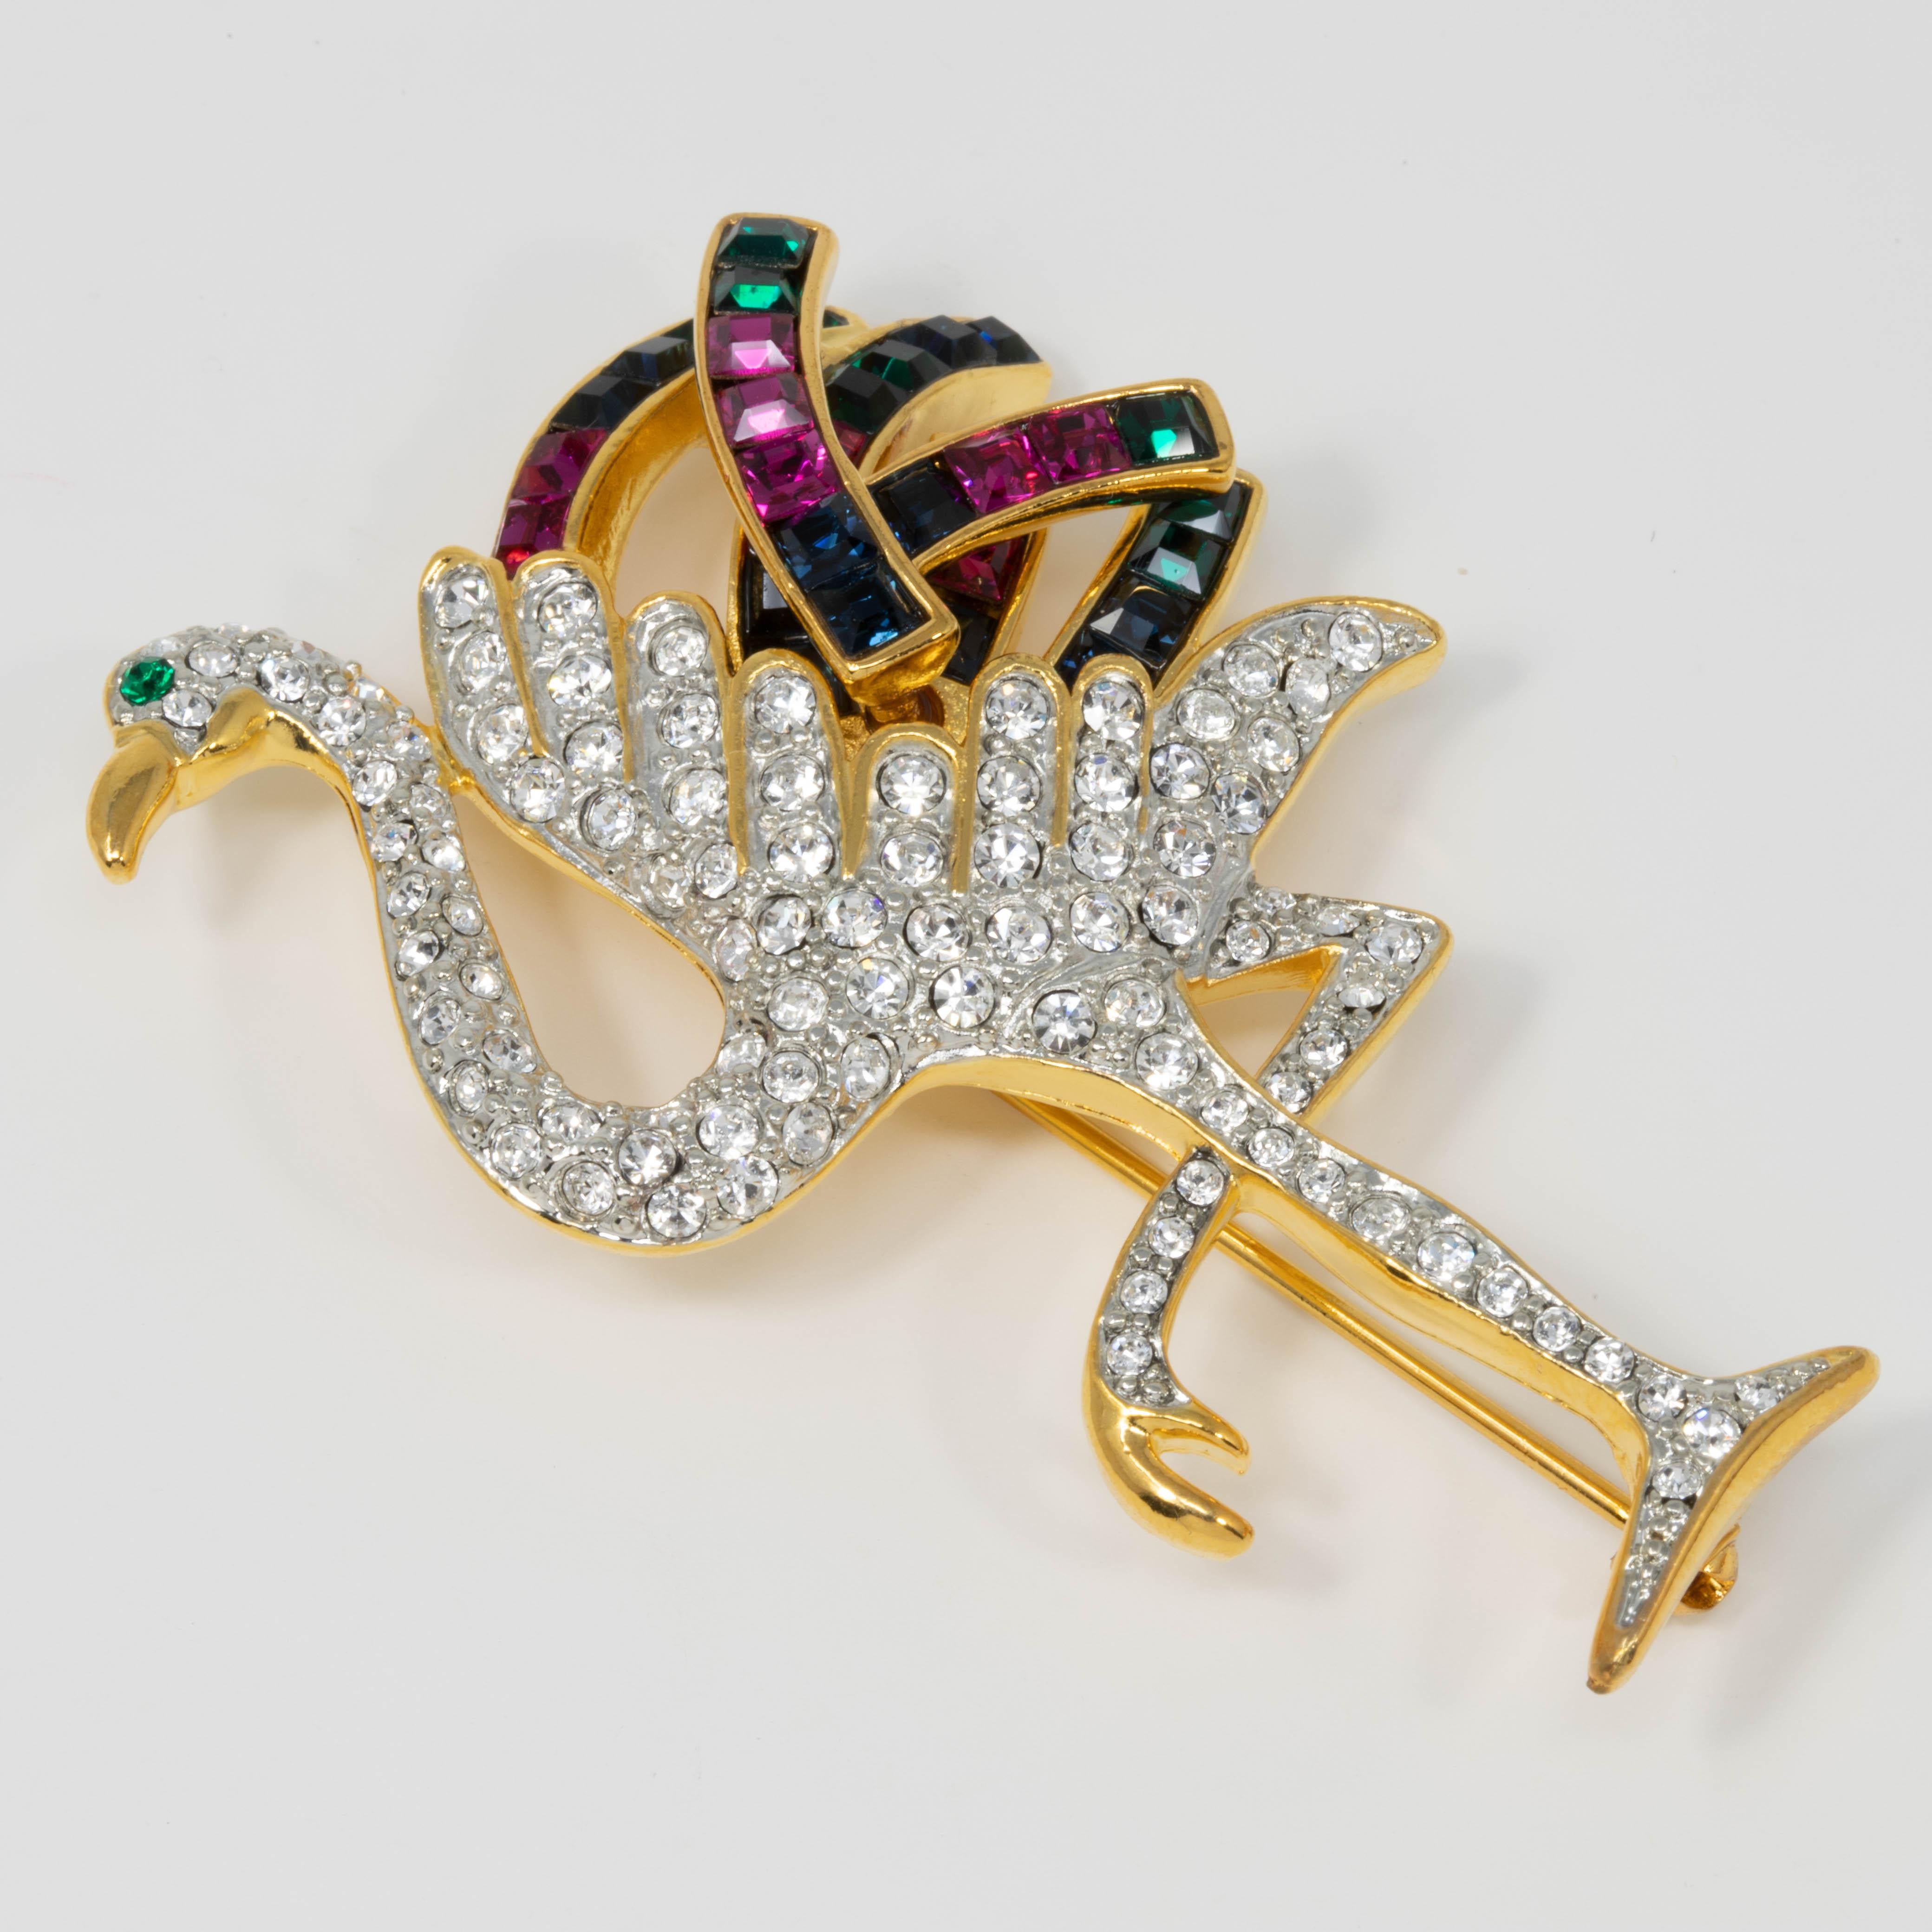 A golden flamingo, decorated with clear pave crystals and colorful jeweled tail feathers. Duchess of Windsor pin brooch by Kenneth Jay Lane.

Crystals: Amethyst, emerald, sapphire

Tags, Marks, Hallmarks: KJL